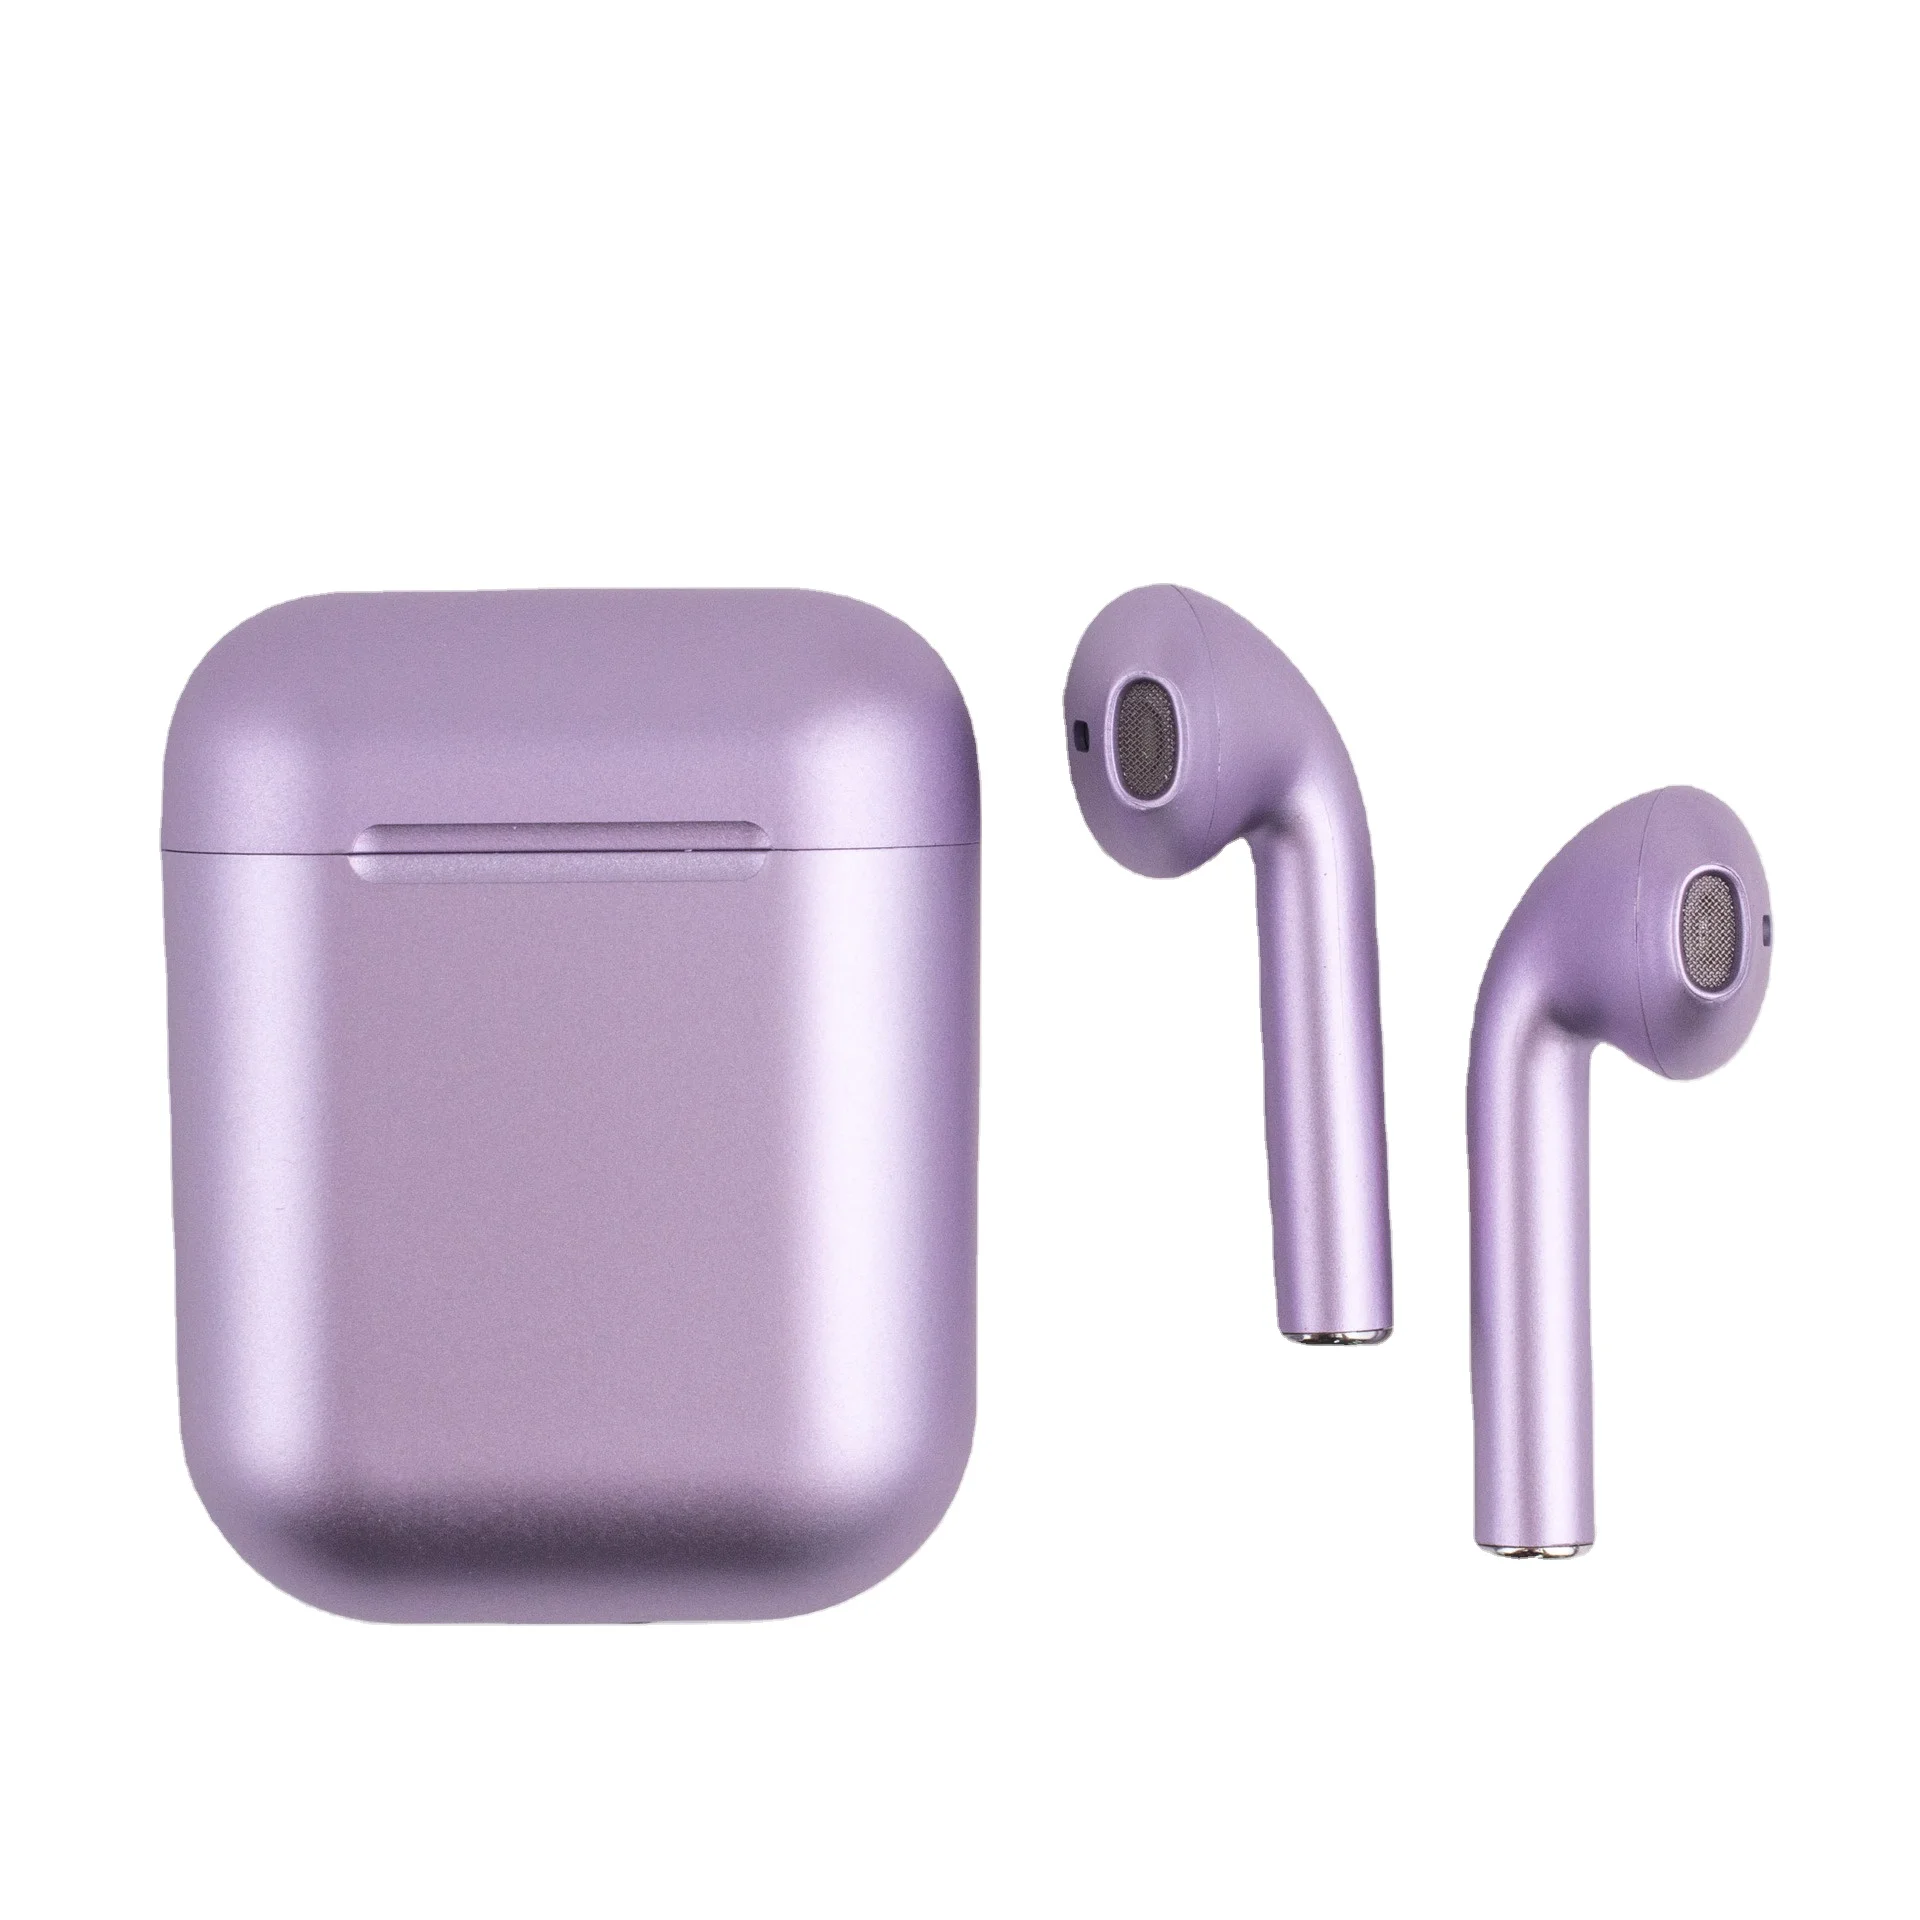 

Original Macaron i12 Touch TWS Wireless Earphone BT 5.0 Headphones True Stereo Android headset Sport Earbud, 6 colors